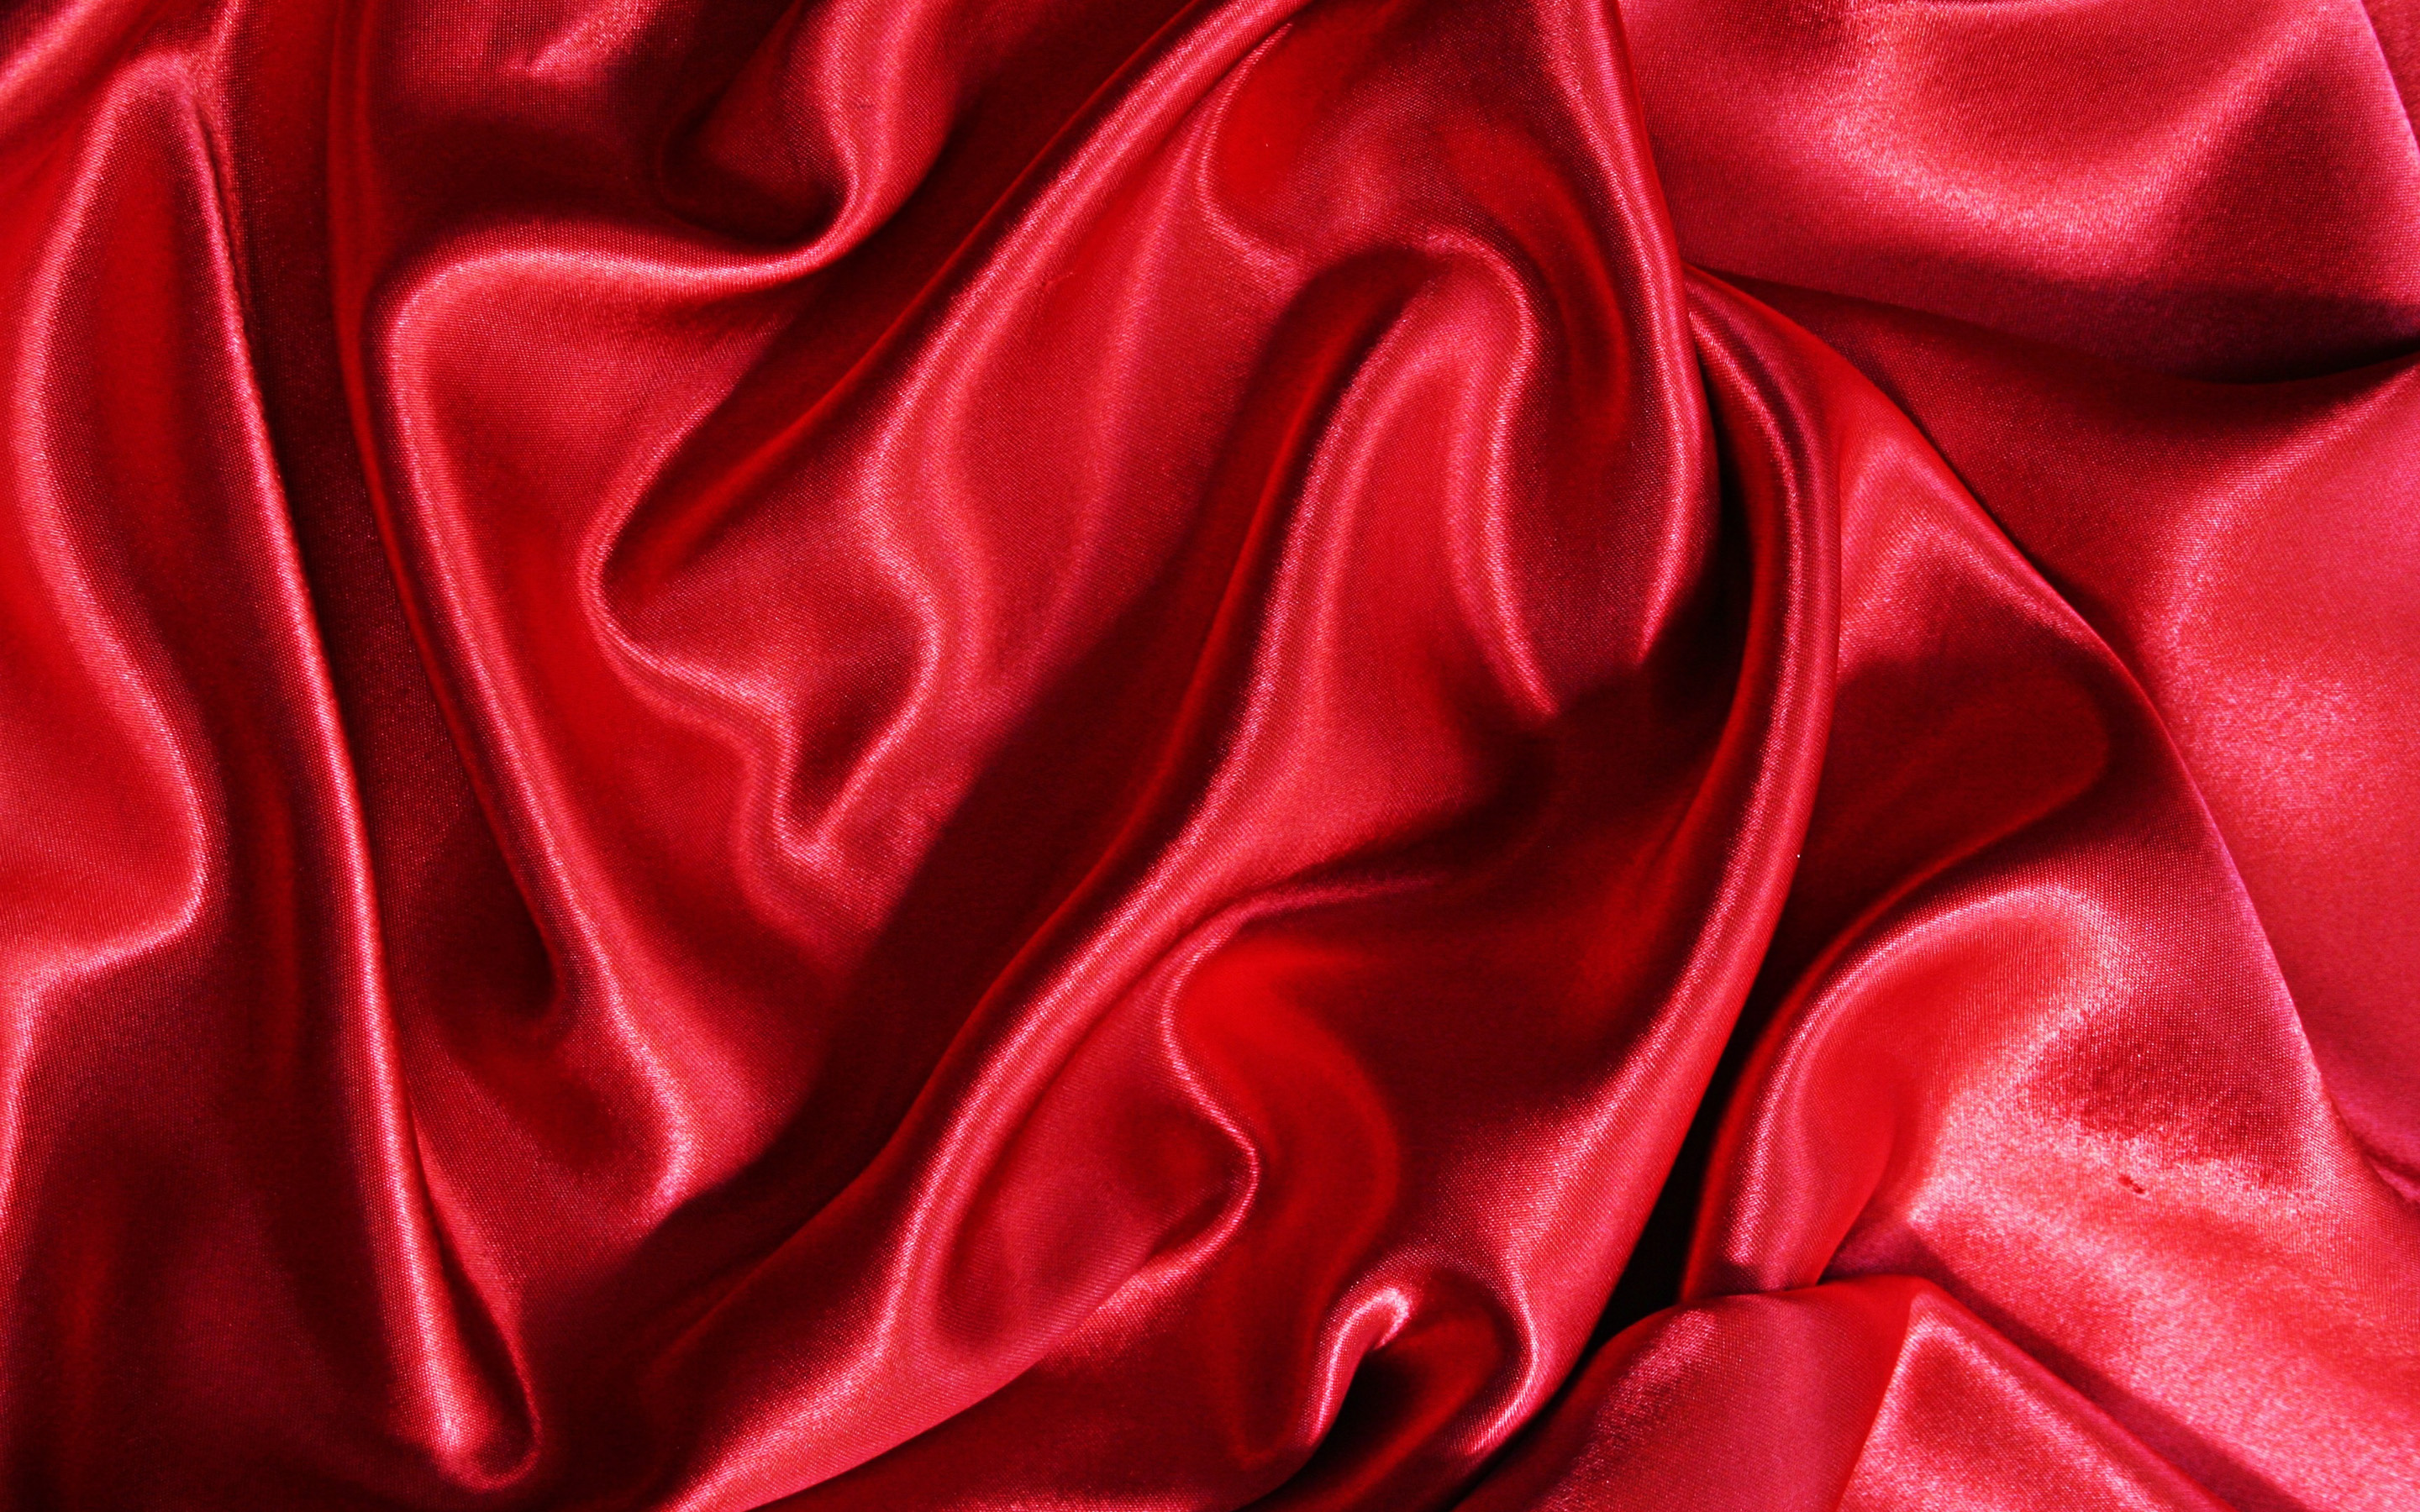 Red silk fabric, Blue fabric texture, High-quality pictures, Desktop wallpapers, 2880x1800 HD Desktop